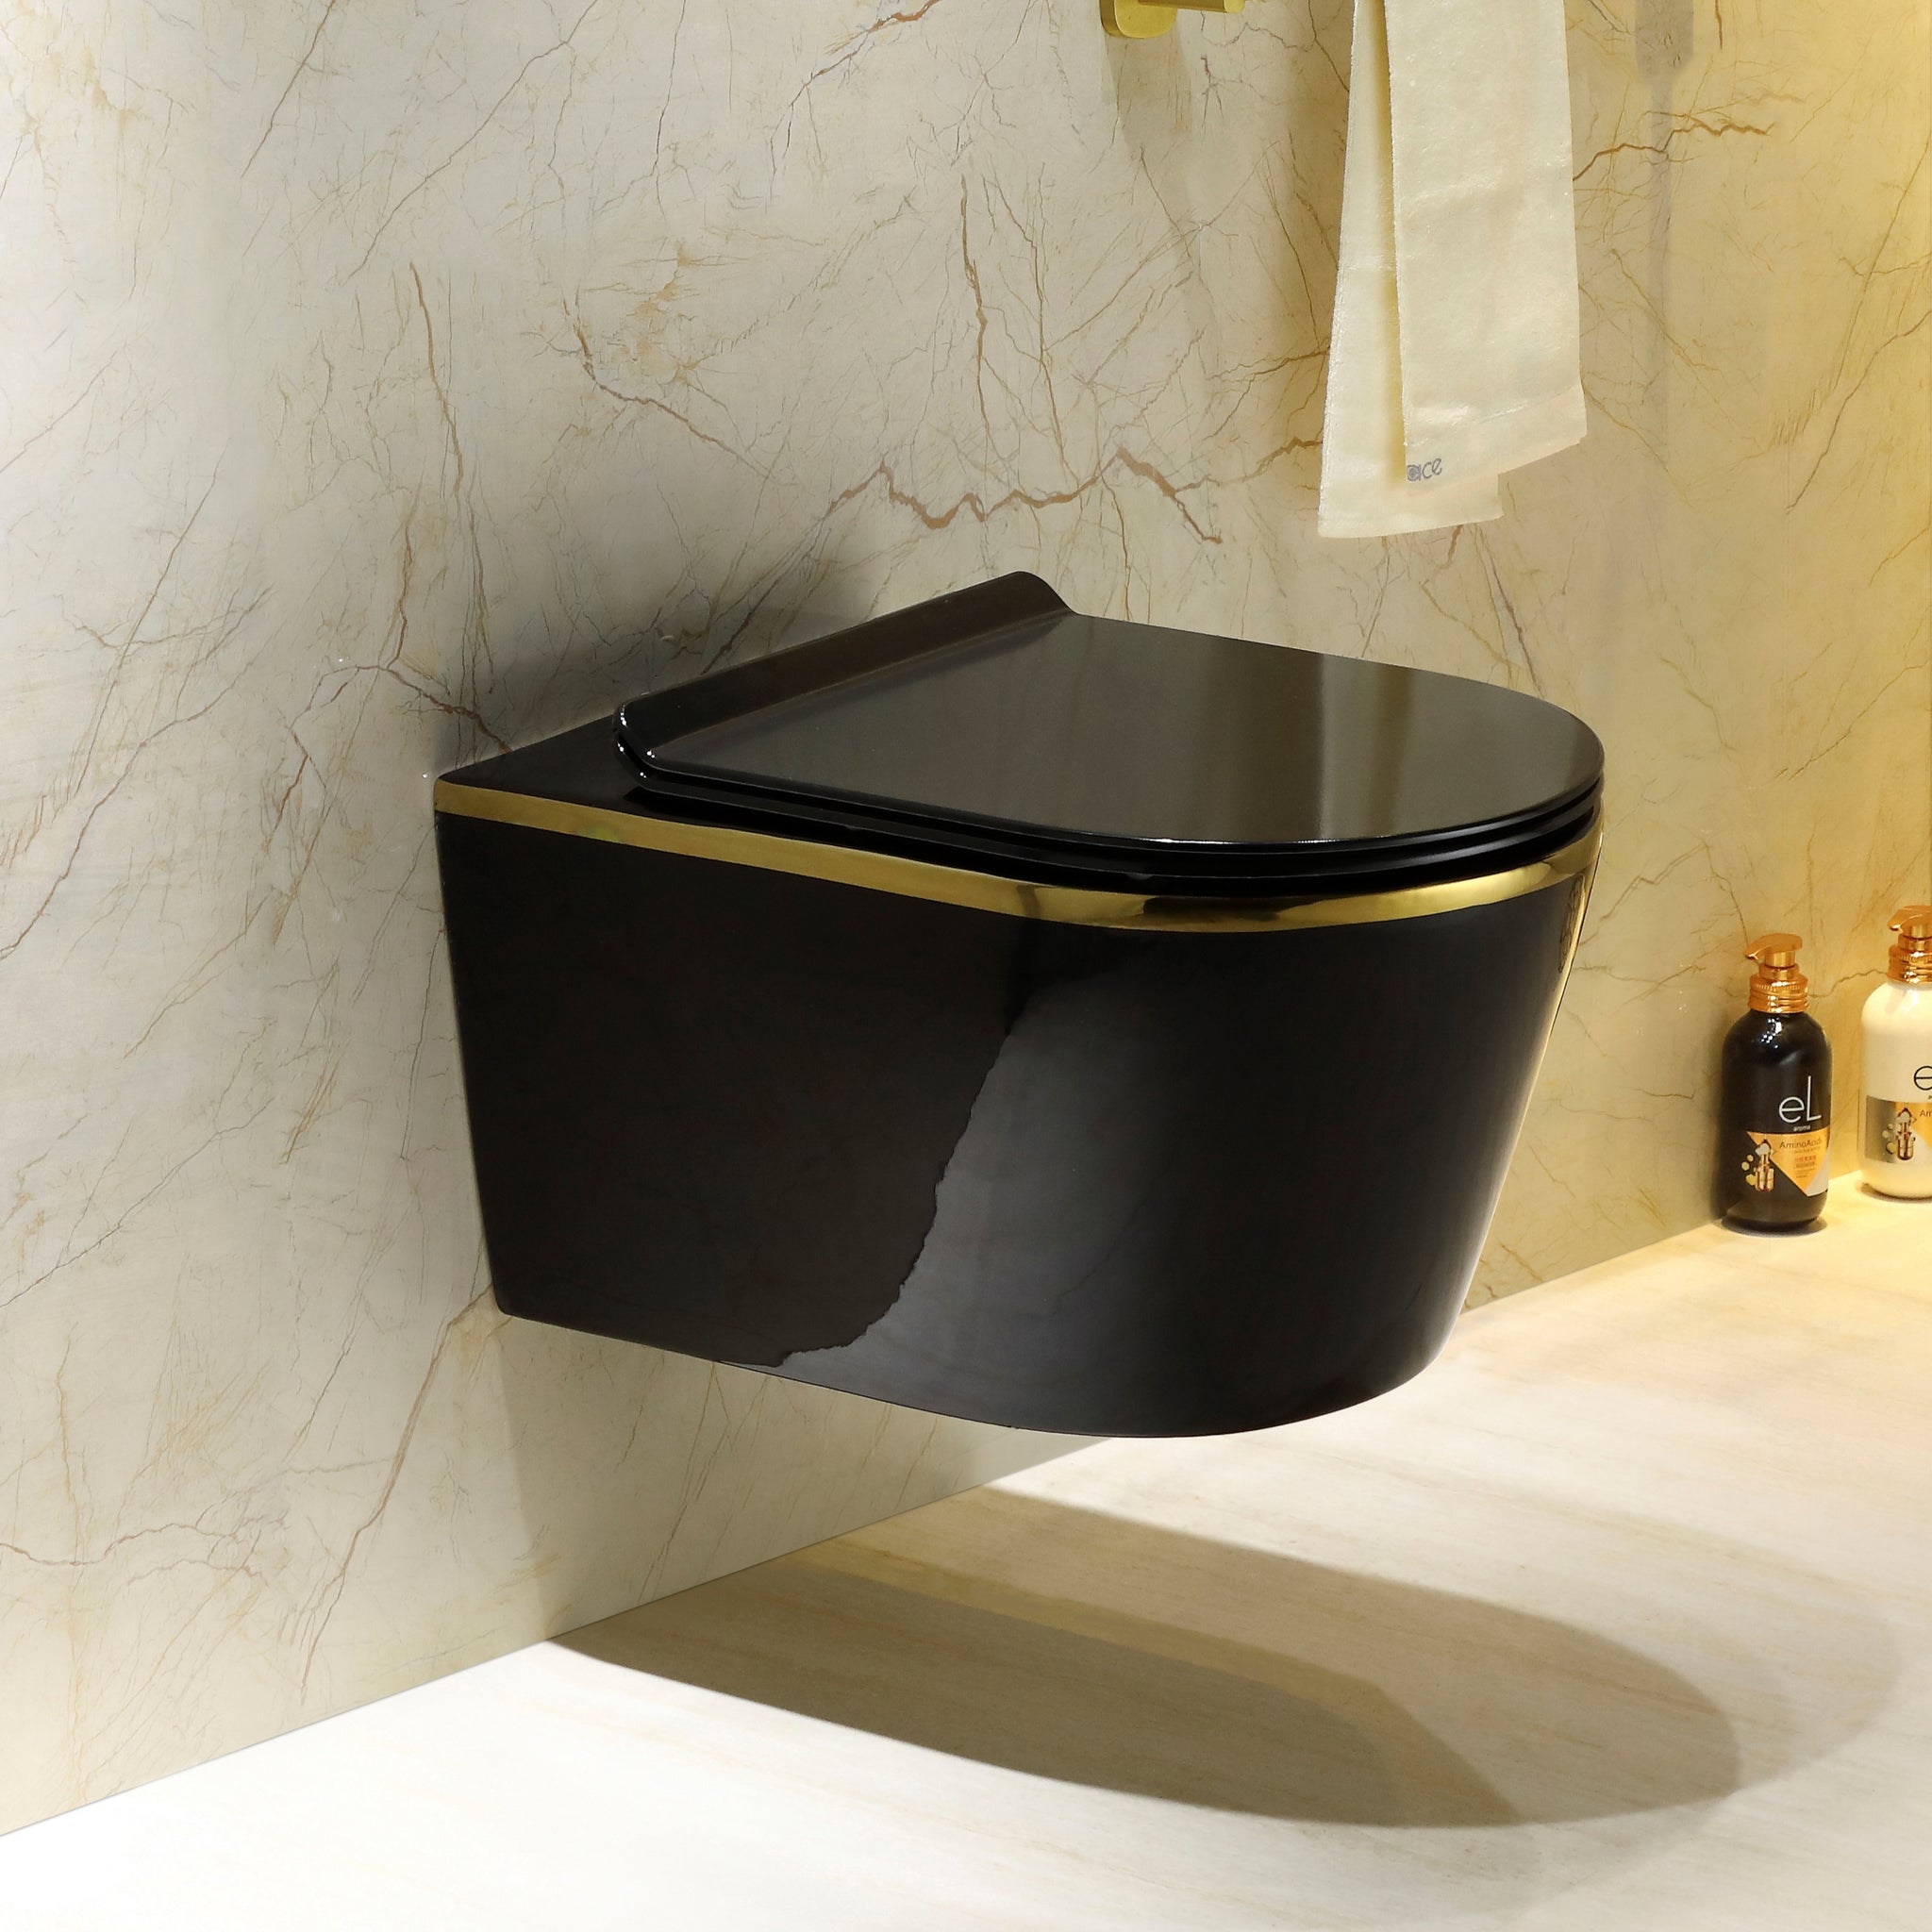 B Backline Ceramic Wall Hung Toilet Wall Mounted Water Closet Commode Rimless Commode Black Gold Color 53 X 36 X 35 Cm